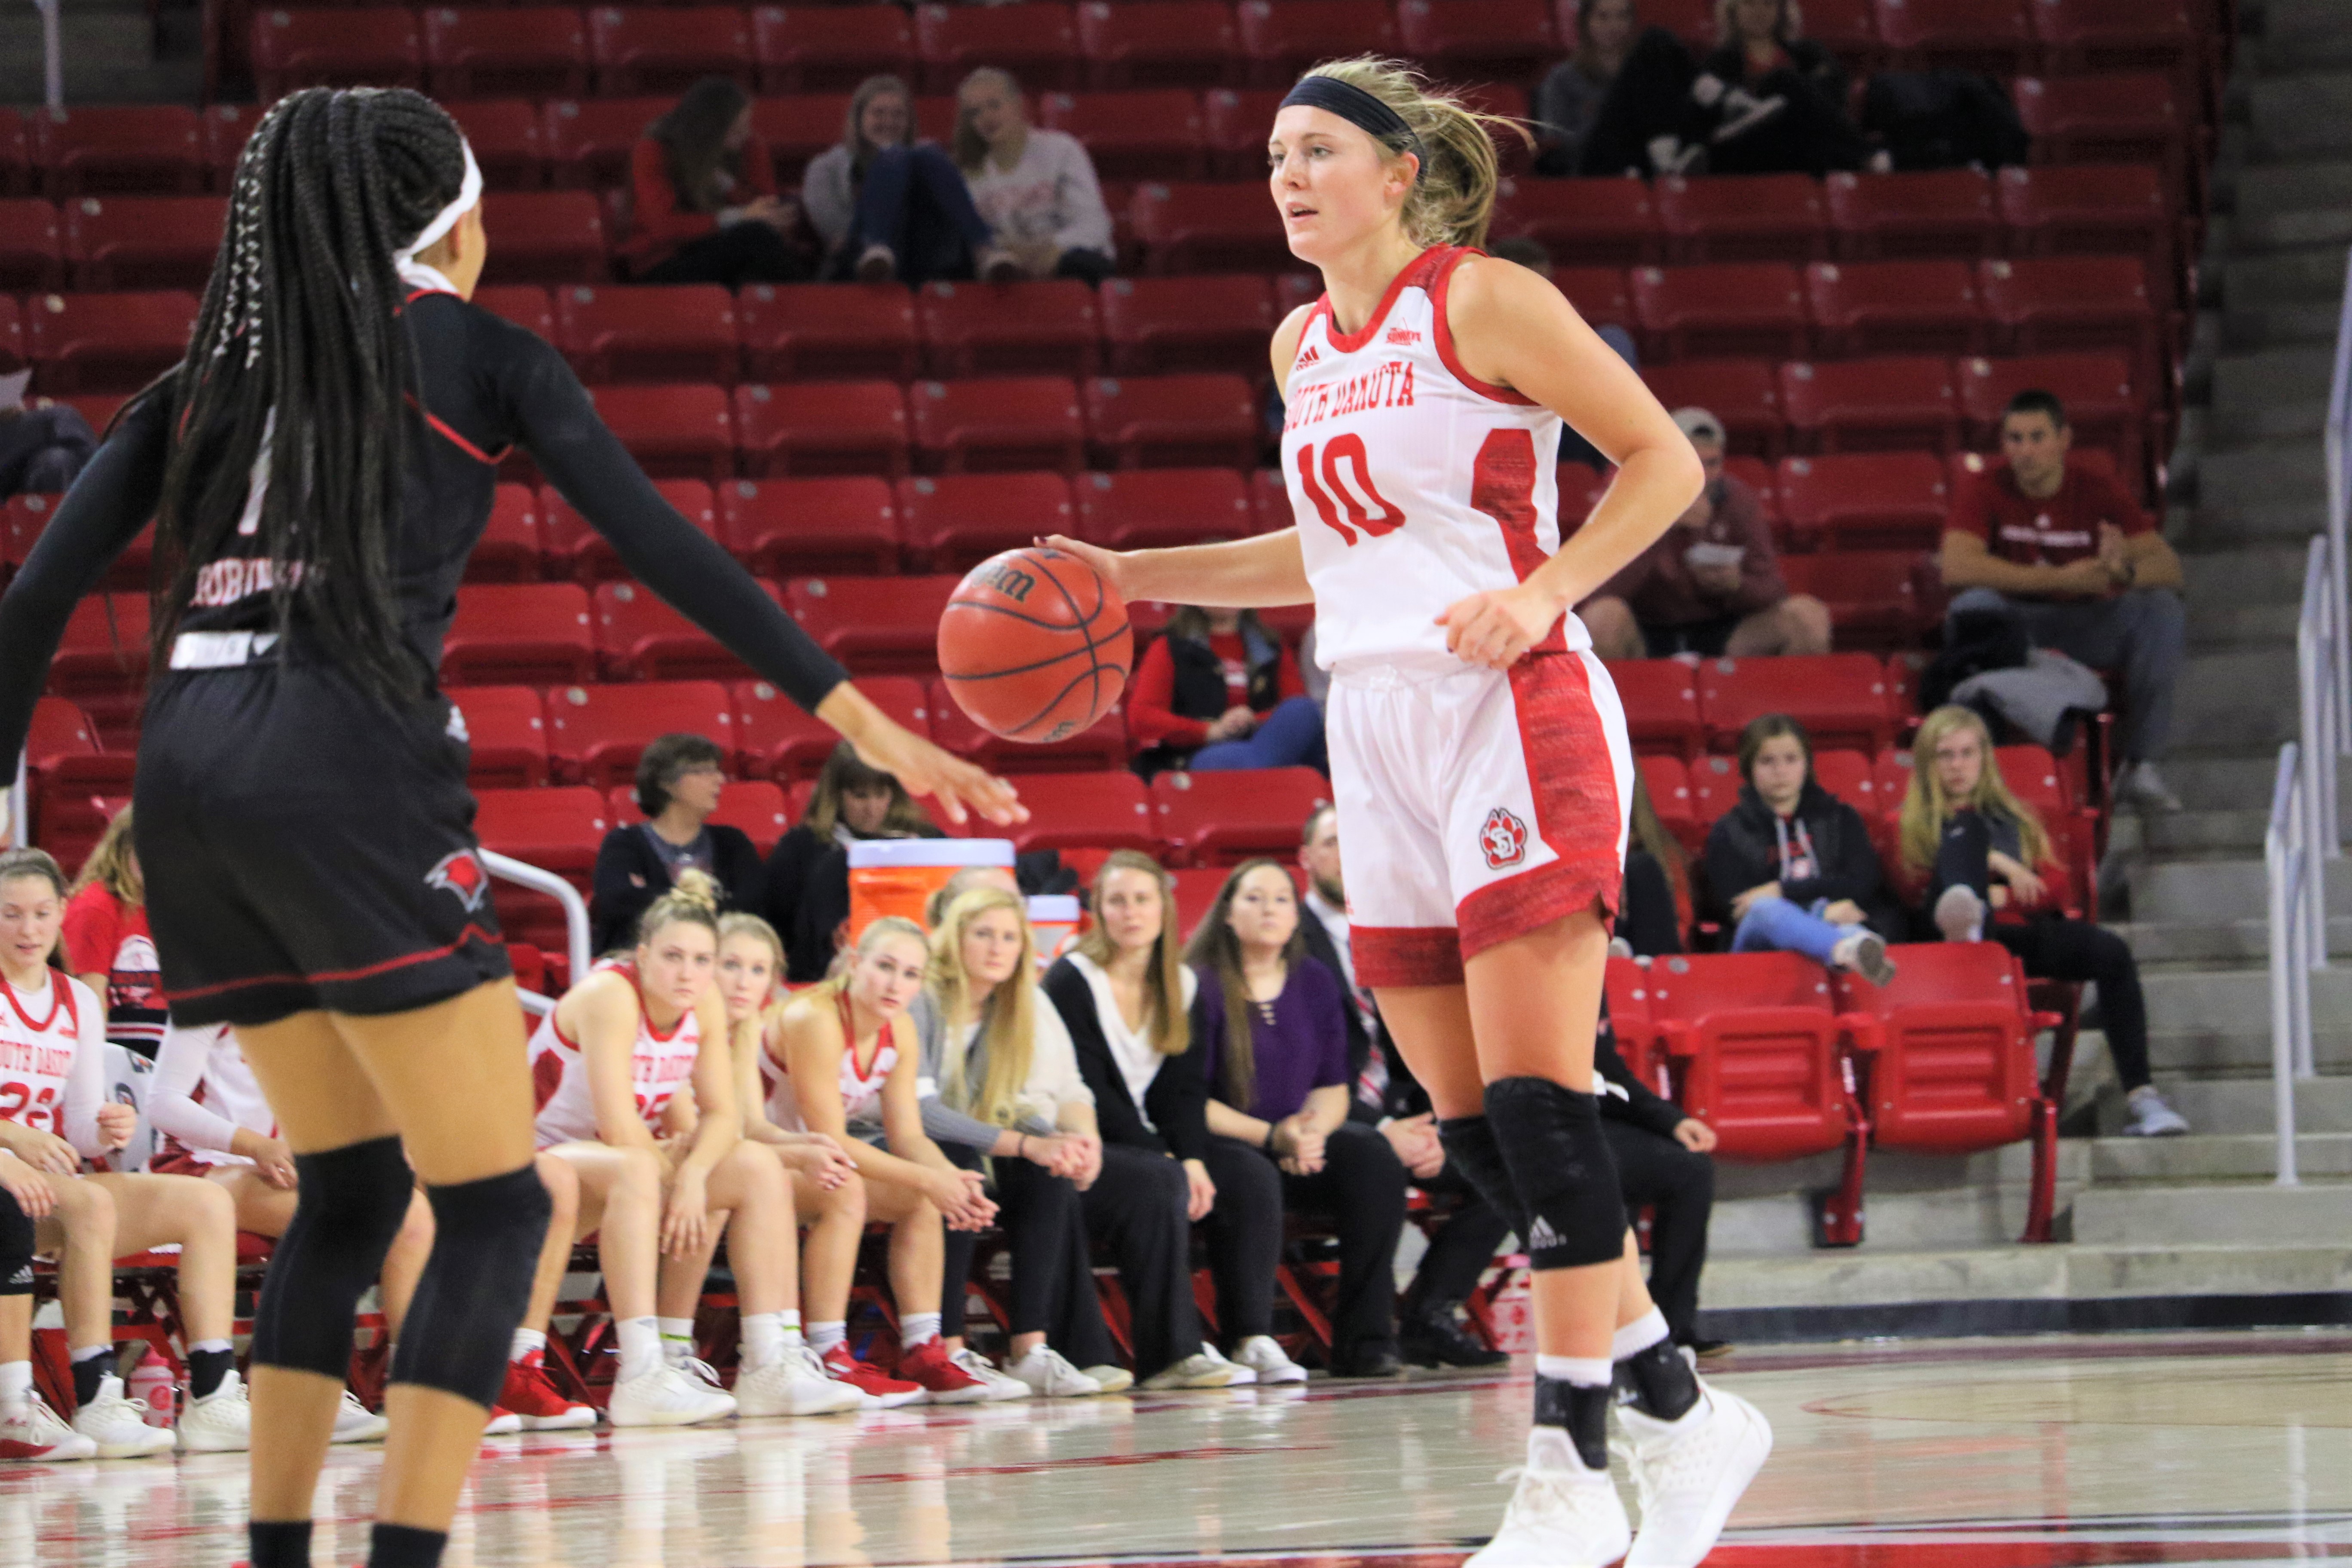 Coyotes rout Incarnate Word 96-43 in home opener